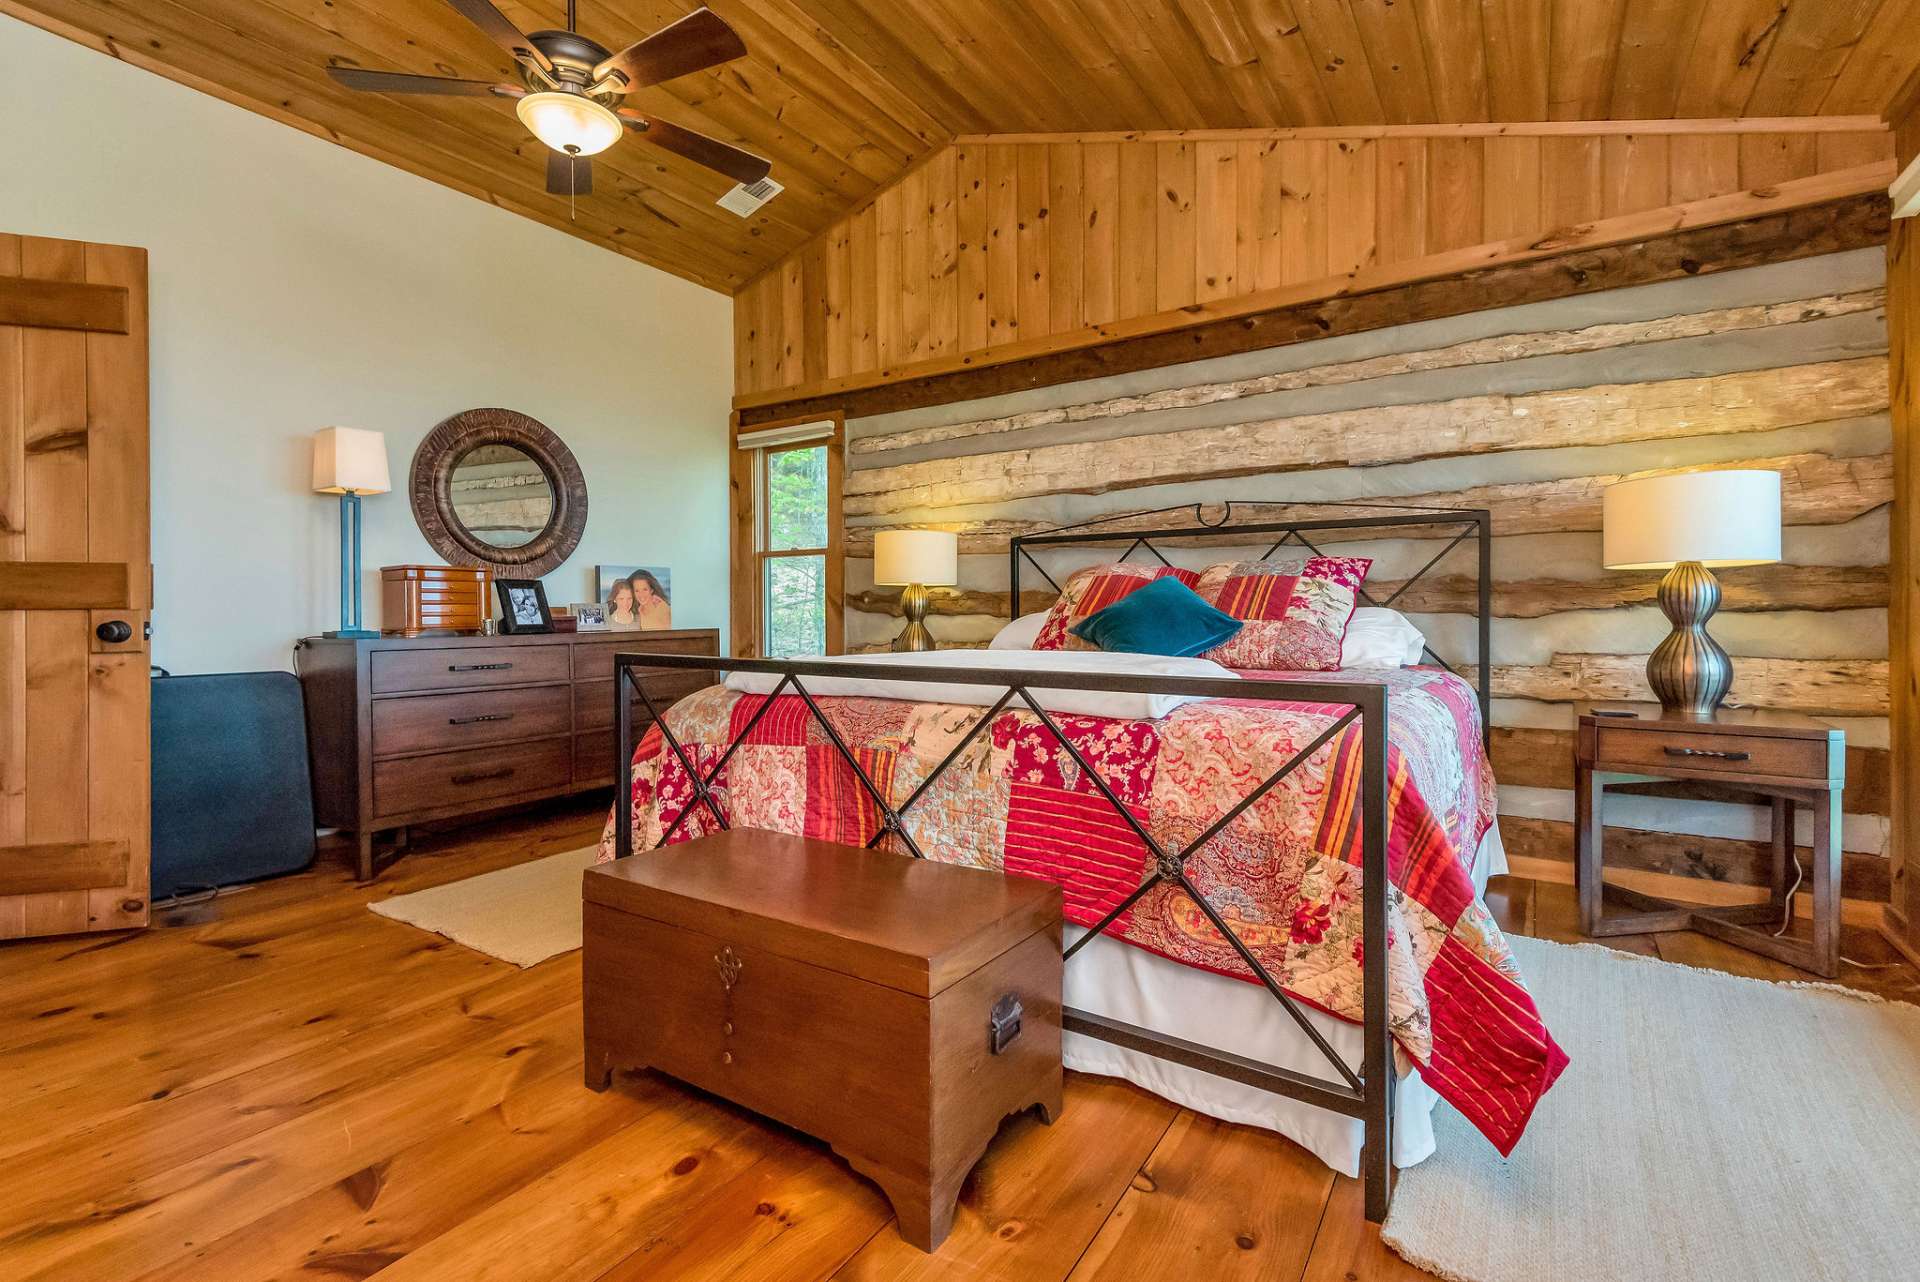 The second bedroom offers your guests the ambiance only a natural stone wood burning fireplace can give.